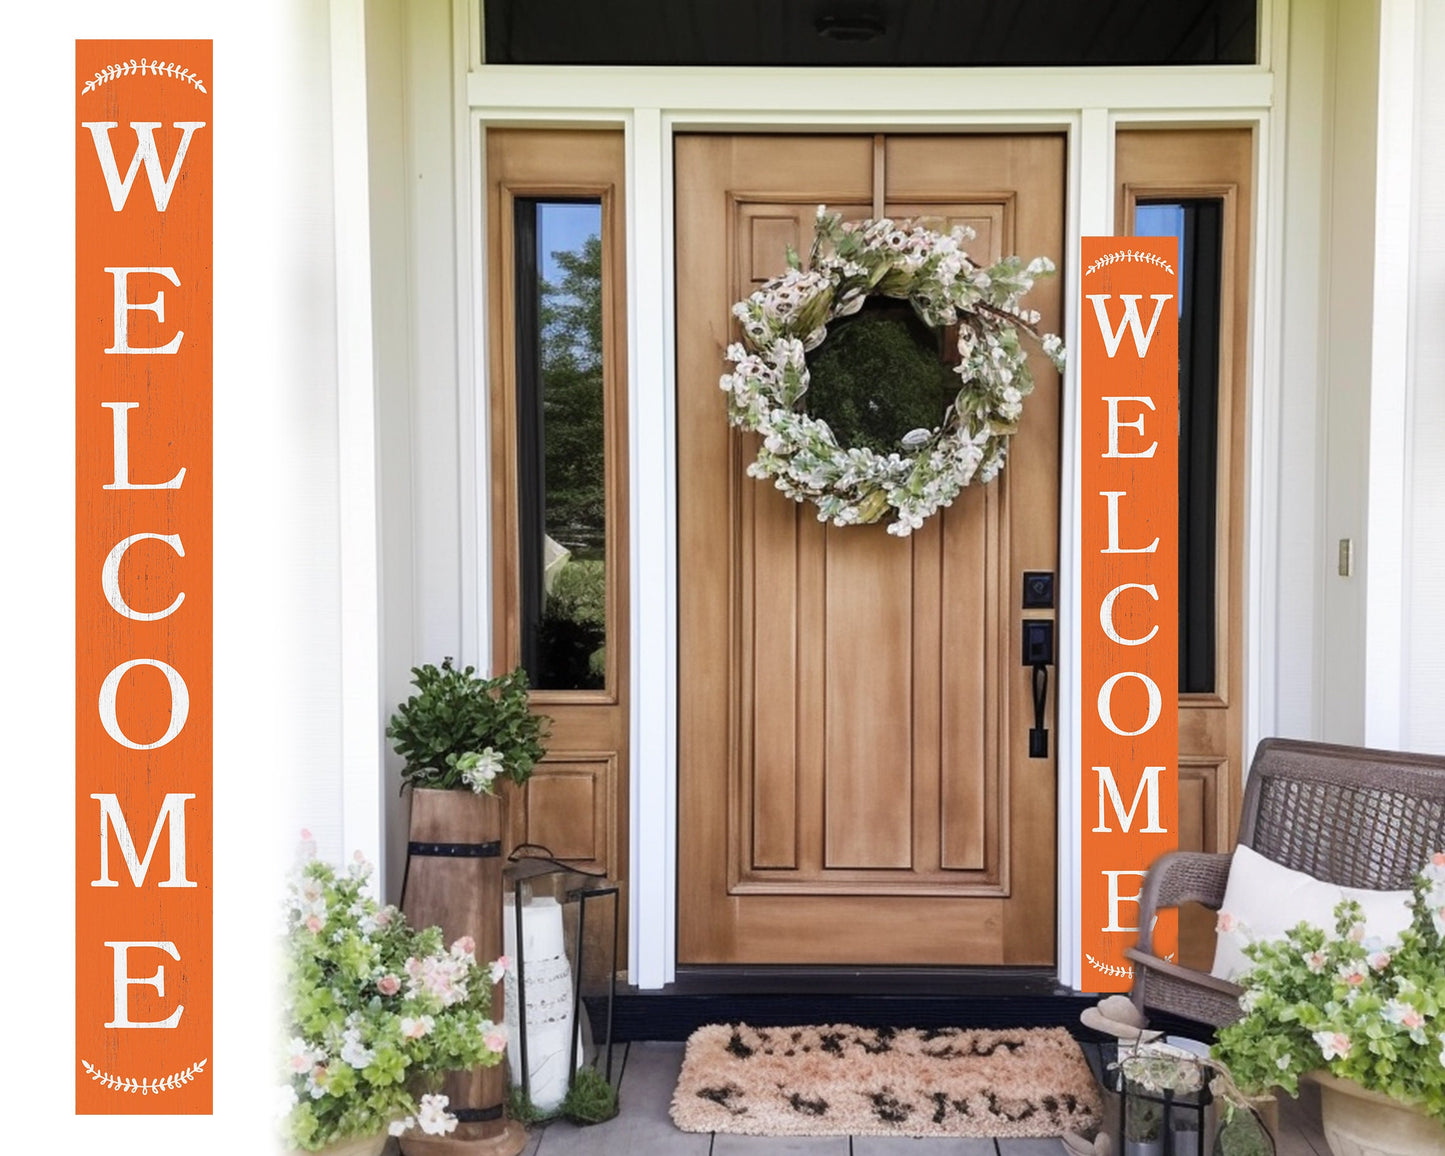 72in Orange Outdoor Welcome Sign | Rustic Sign | Front Door, Entryway Decor | Foldable, Portable | UV Protected & Sealed